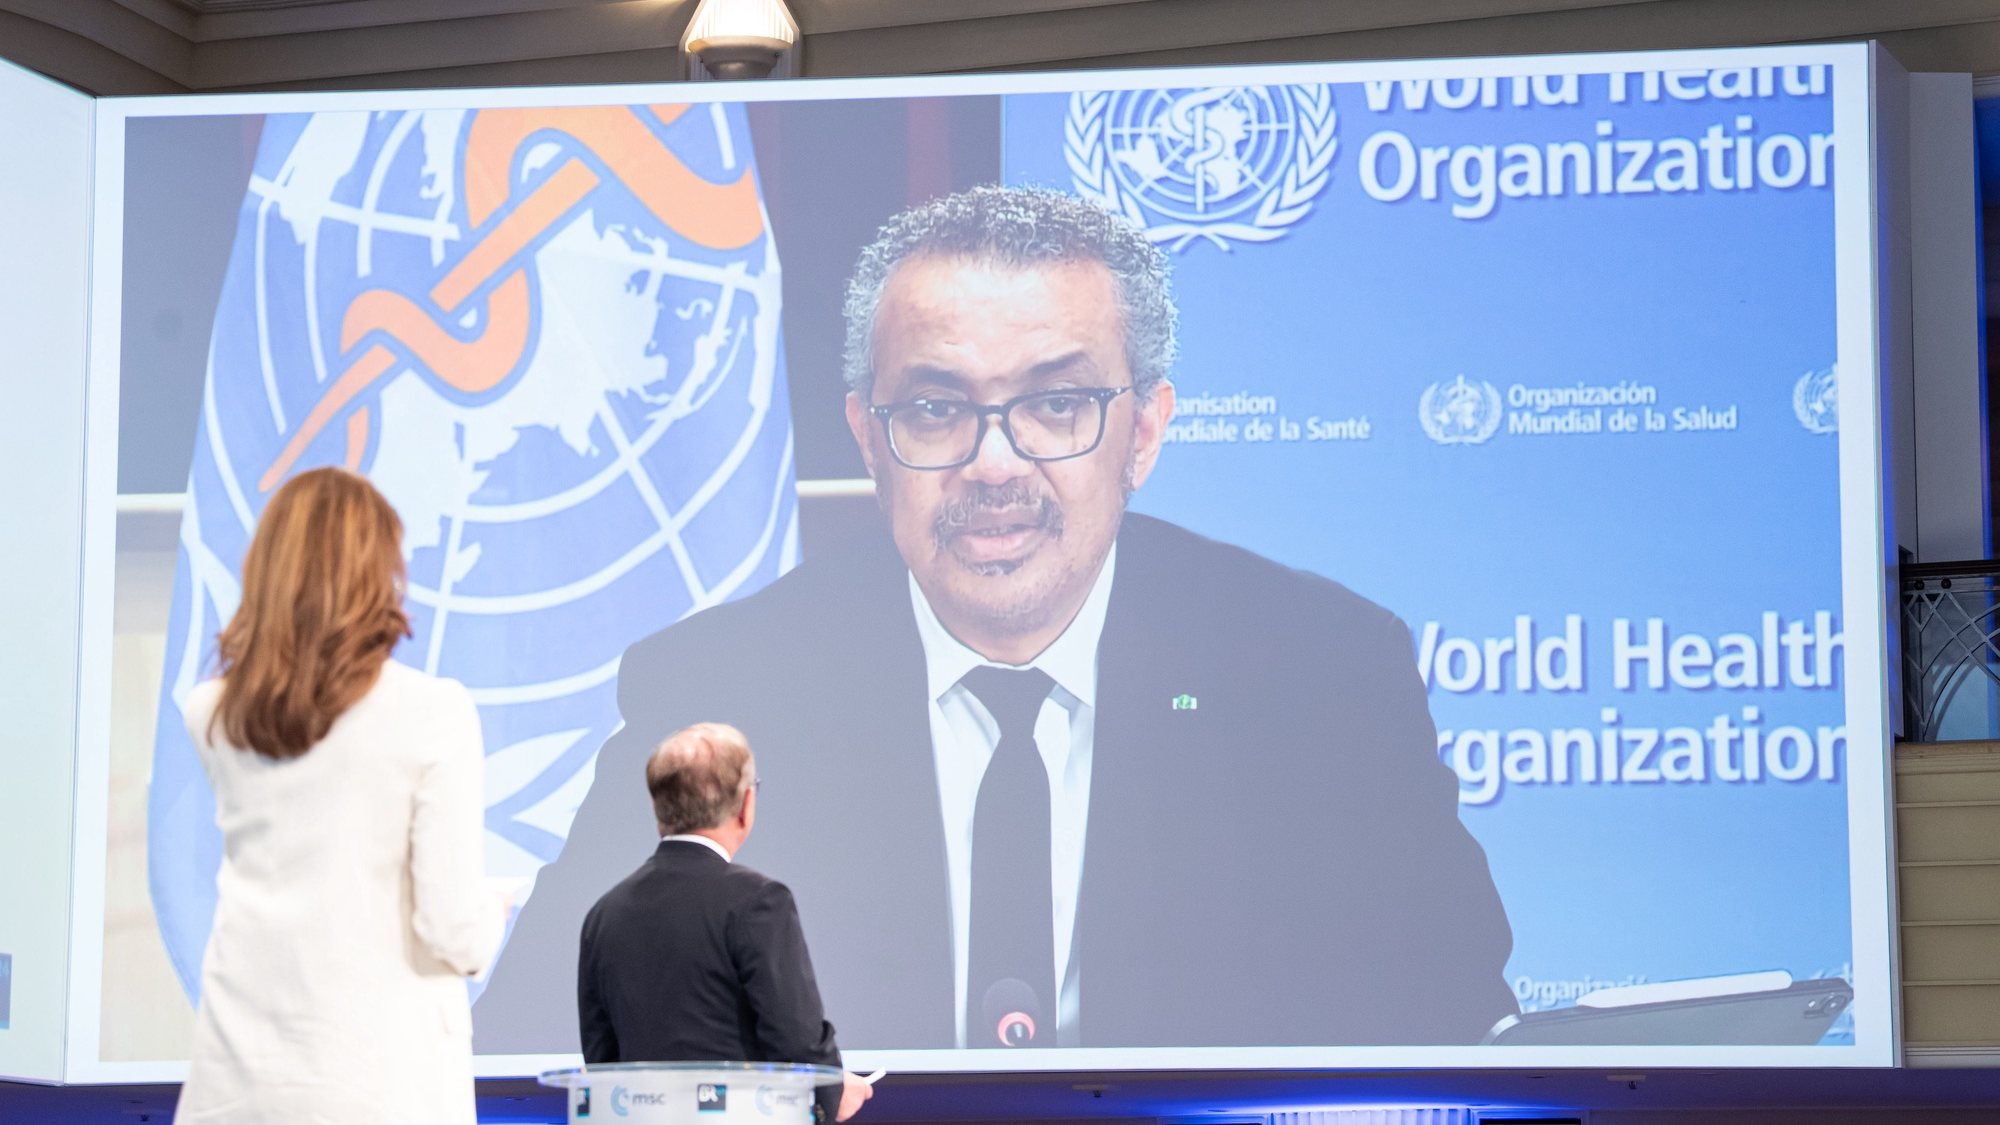 epa09024217 A handout photo made available by the Munich Security Conference (MSC) shows shows Tedros Adhanom Ghebreyesus (screen), Director General of the World Health Organization (WHO) speaking during the Munich Security Conference 2021 Special Edition, in Munich, Bavaria, Germany, 19 February 2021. Some international decision-makers discuss on international security policy in a live broadcast during the MSC Special Edition. Due to the pandemic, the 57th Munich Security Conference is postponed at a later date in 2021.  EPA/MSC/Mueller / HANDOUT  HANDOUT EDITORIAL USE ONLY/NO SALES